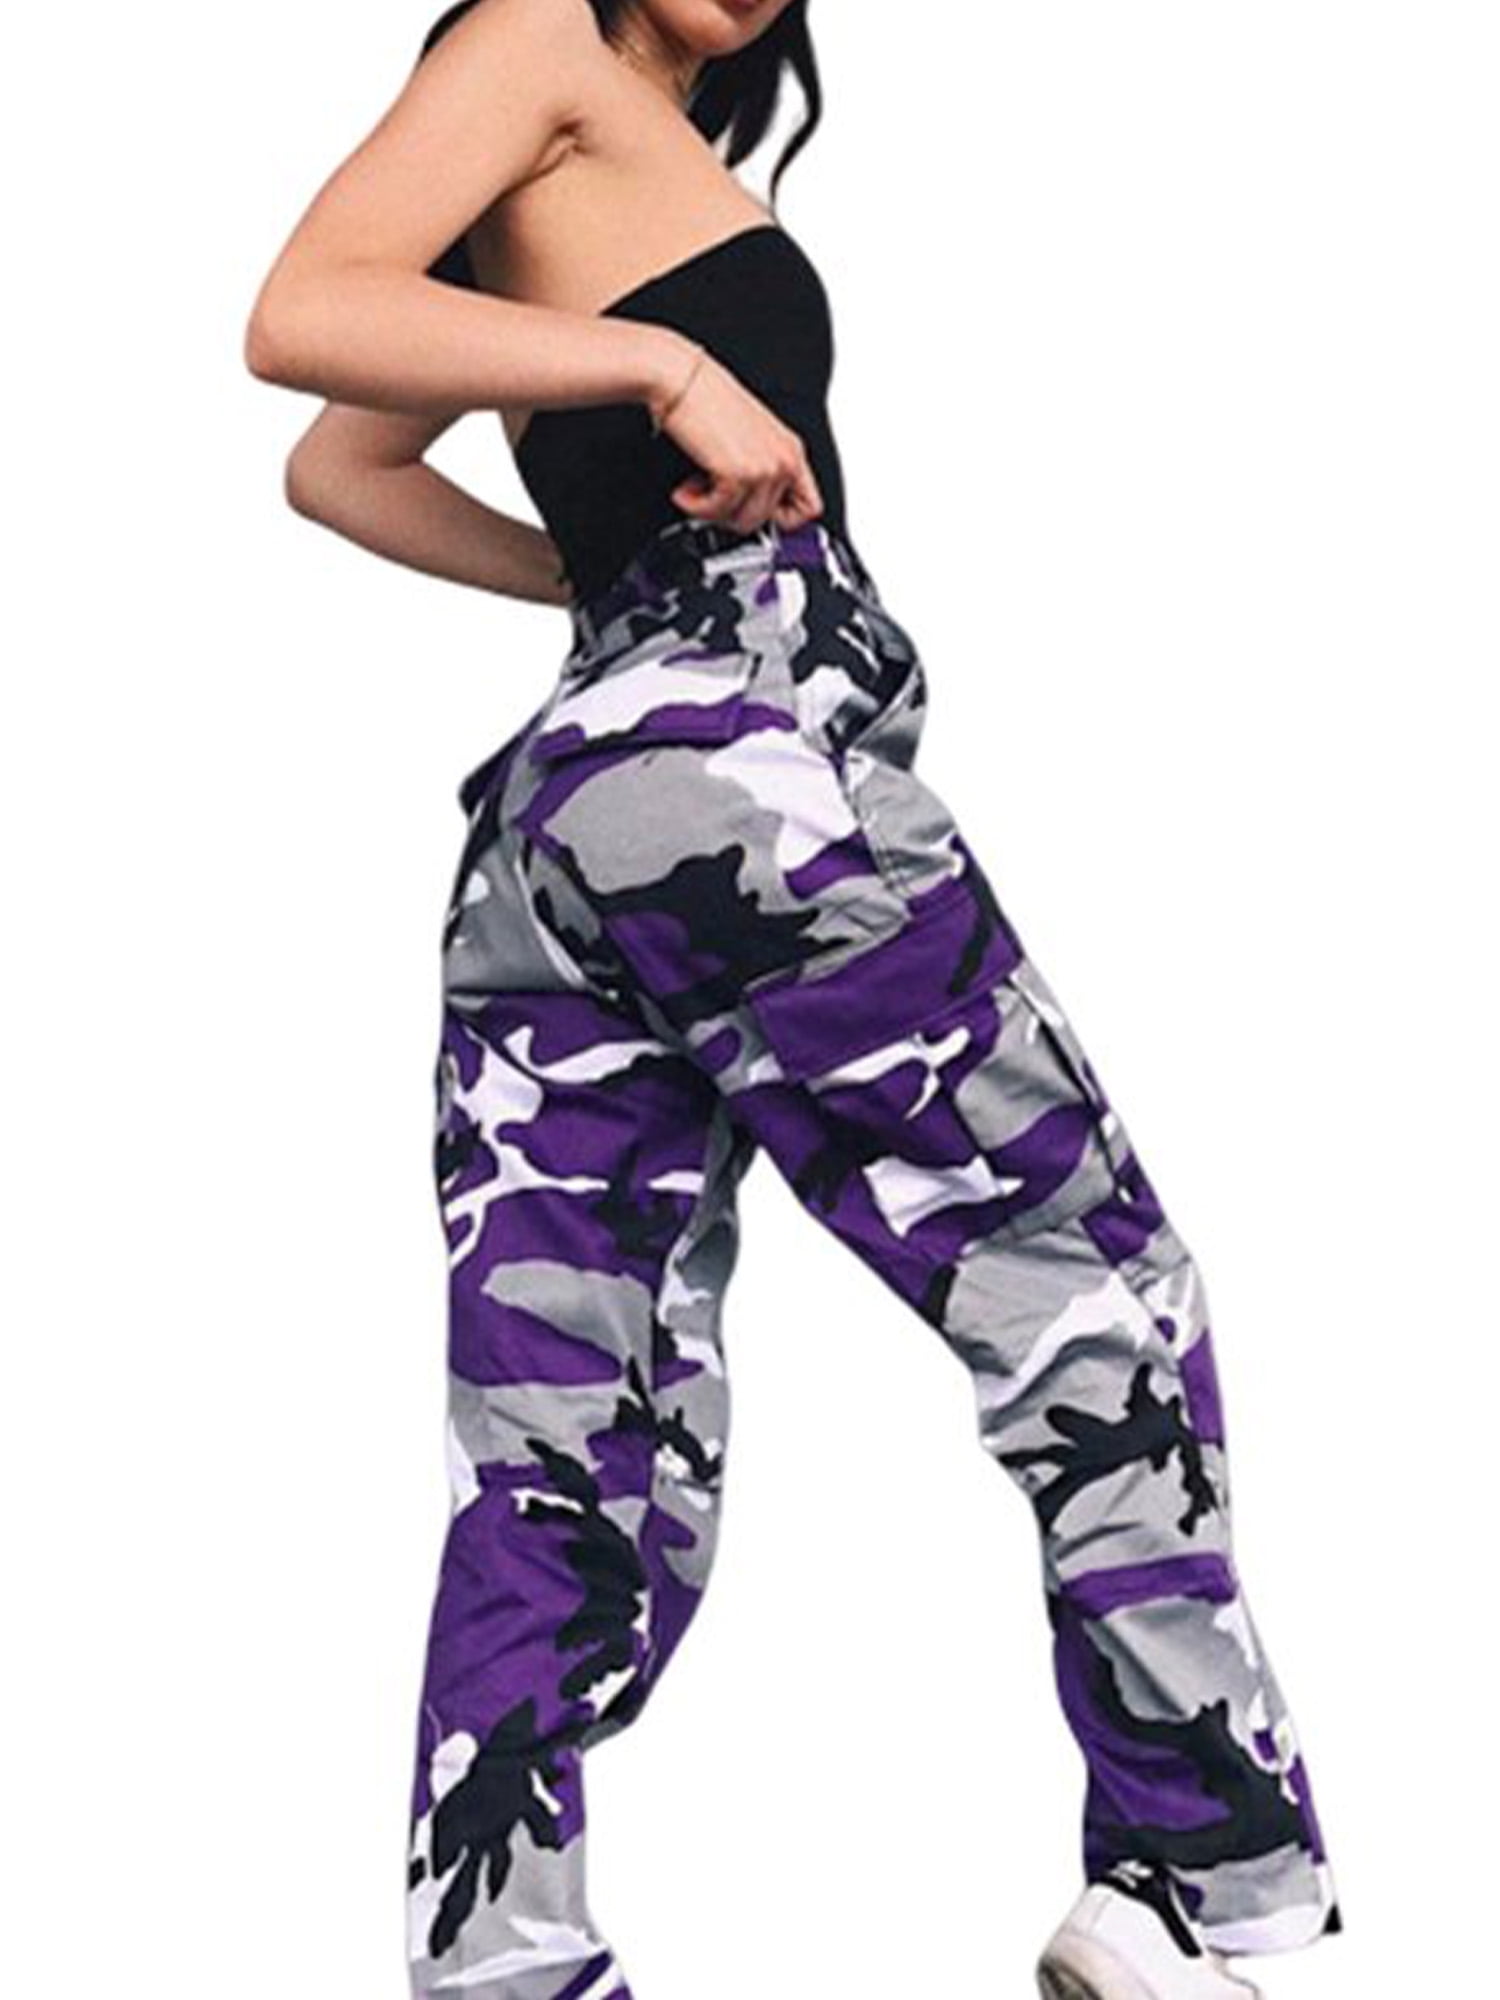 Crazy Lover Ladies Womens Jeans Trousers Camouflage Cargo Pants Green  Sizes UK 8 10 12 14 Tag S fits UK8 Waist 2728 inches 68571 cm   Amazoncouk Fashion